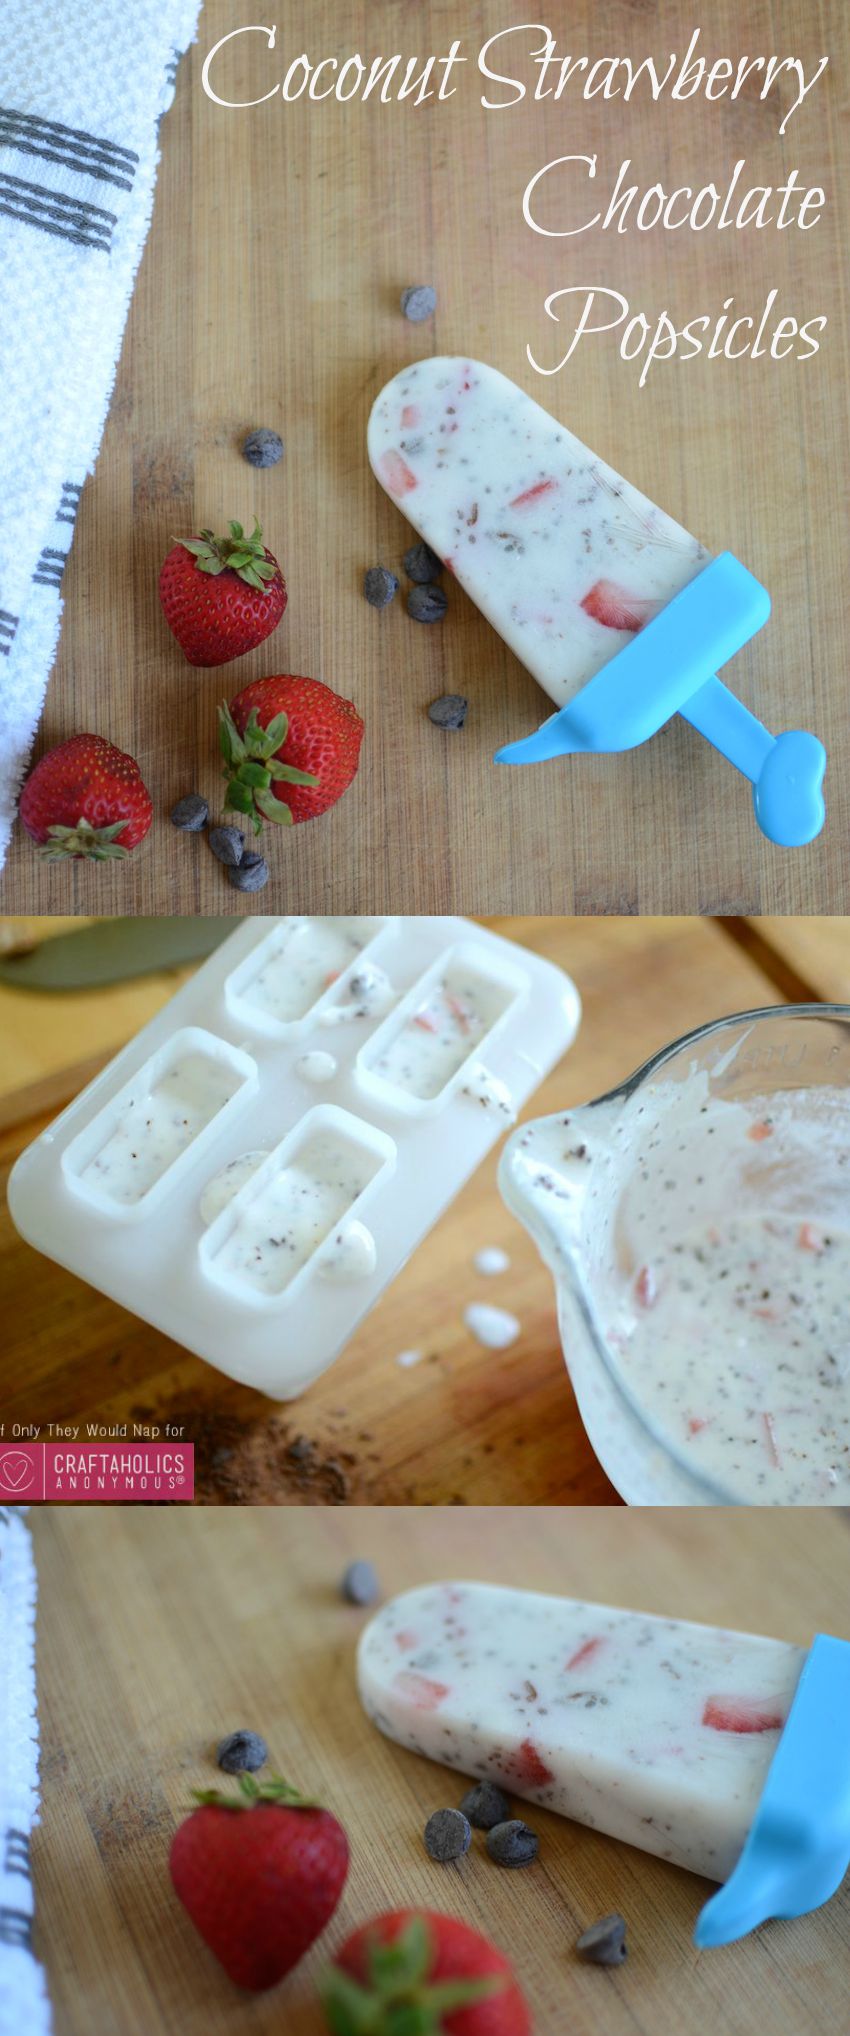 Coconut Strawberry Chocolate Popsicles - easy to make and good for you! | Craftaholics Anonymous®